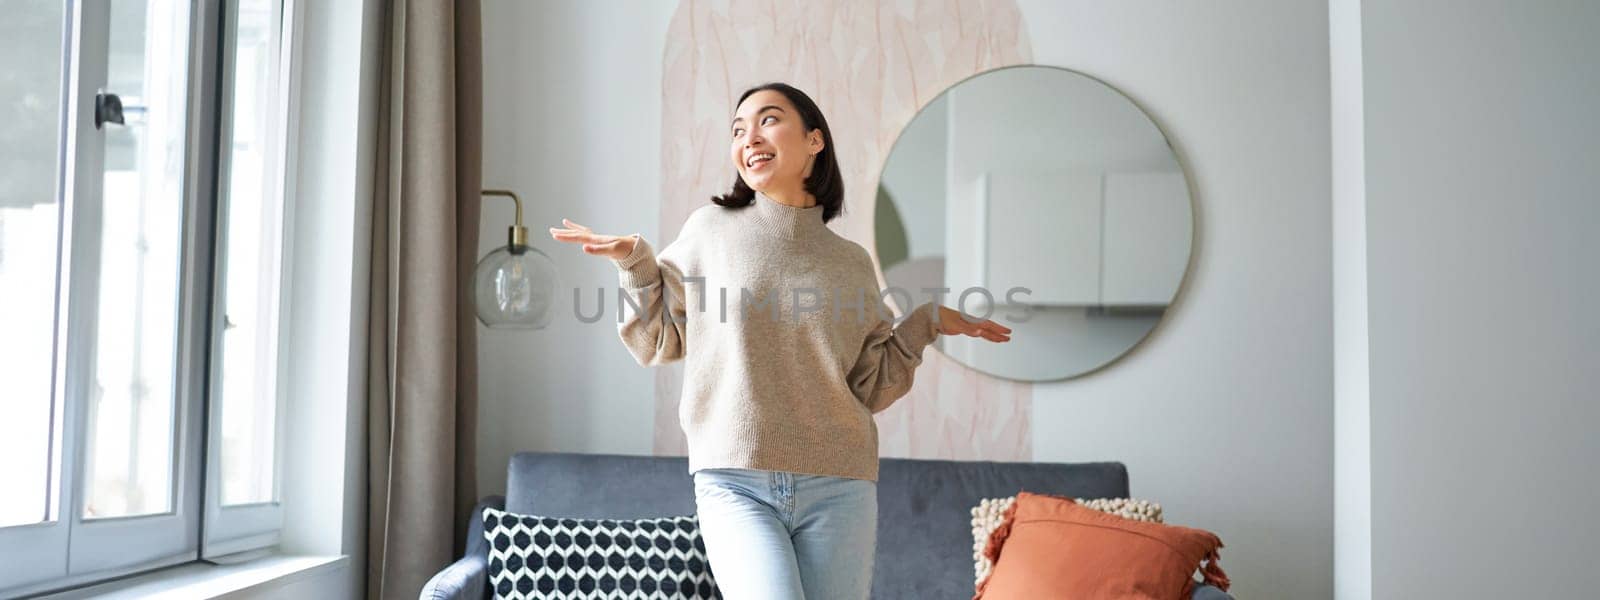 People and emotions. Joyful teen girl dancing in her room, feeling happy and carefree, concept of joy and satisfaction.